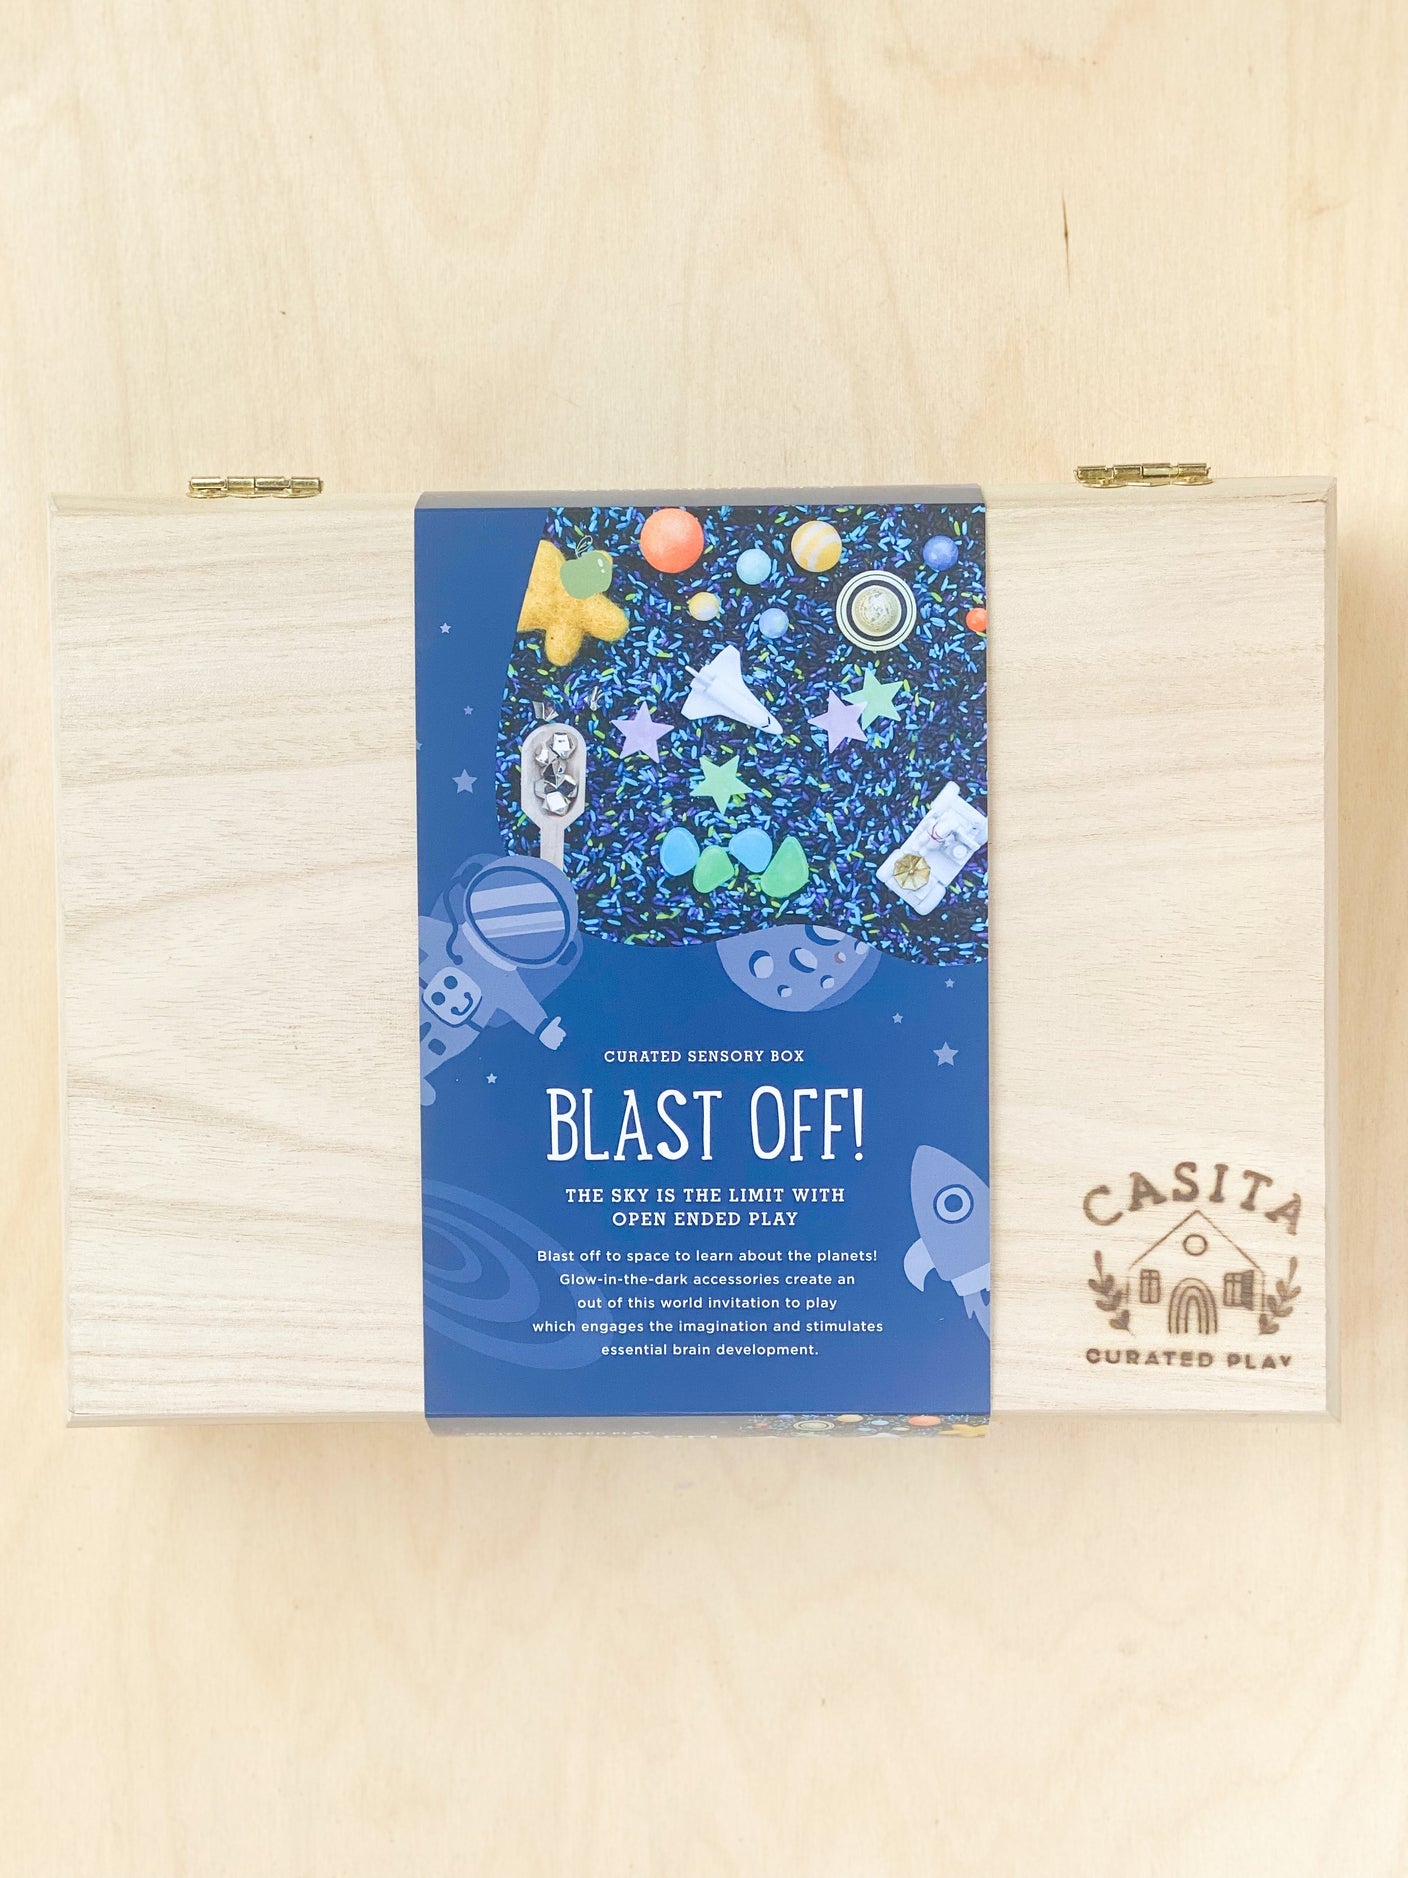 casita curated play / Blast off to space to learn about the planets - Glow-in-the-dark accessories create an out of this world invitation to play! Includes a full planet set, surprise space figurines, felt star, wooden scoop, and glow-in-the-dark rocks & stars.